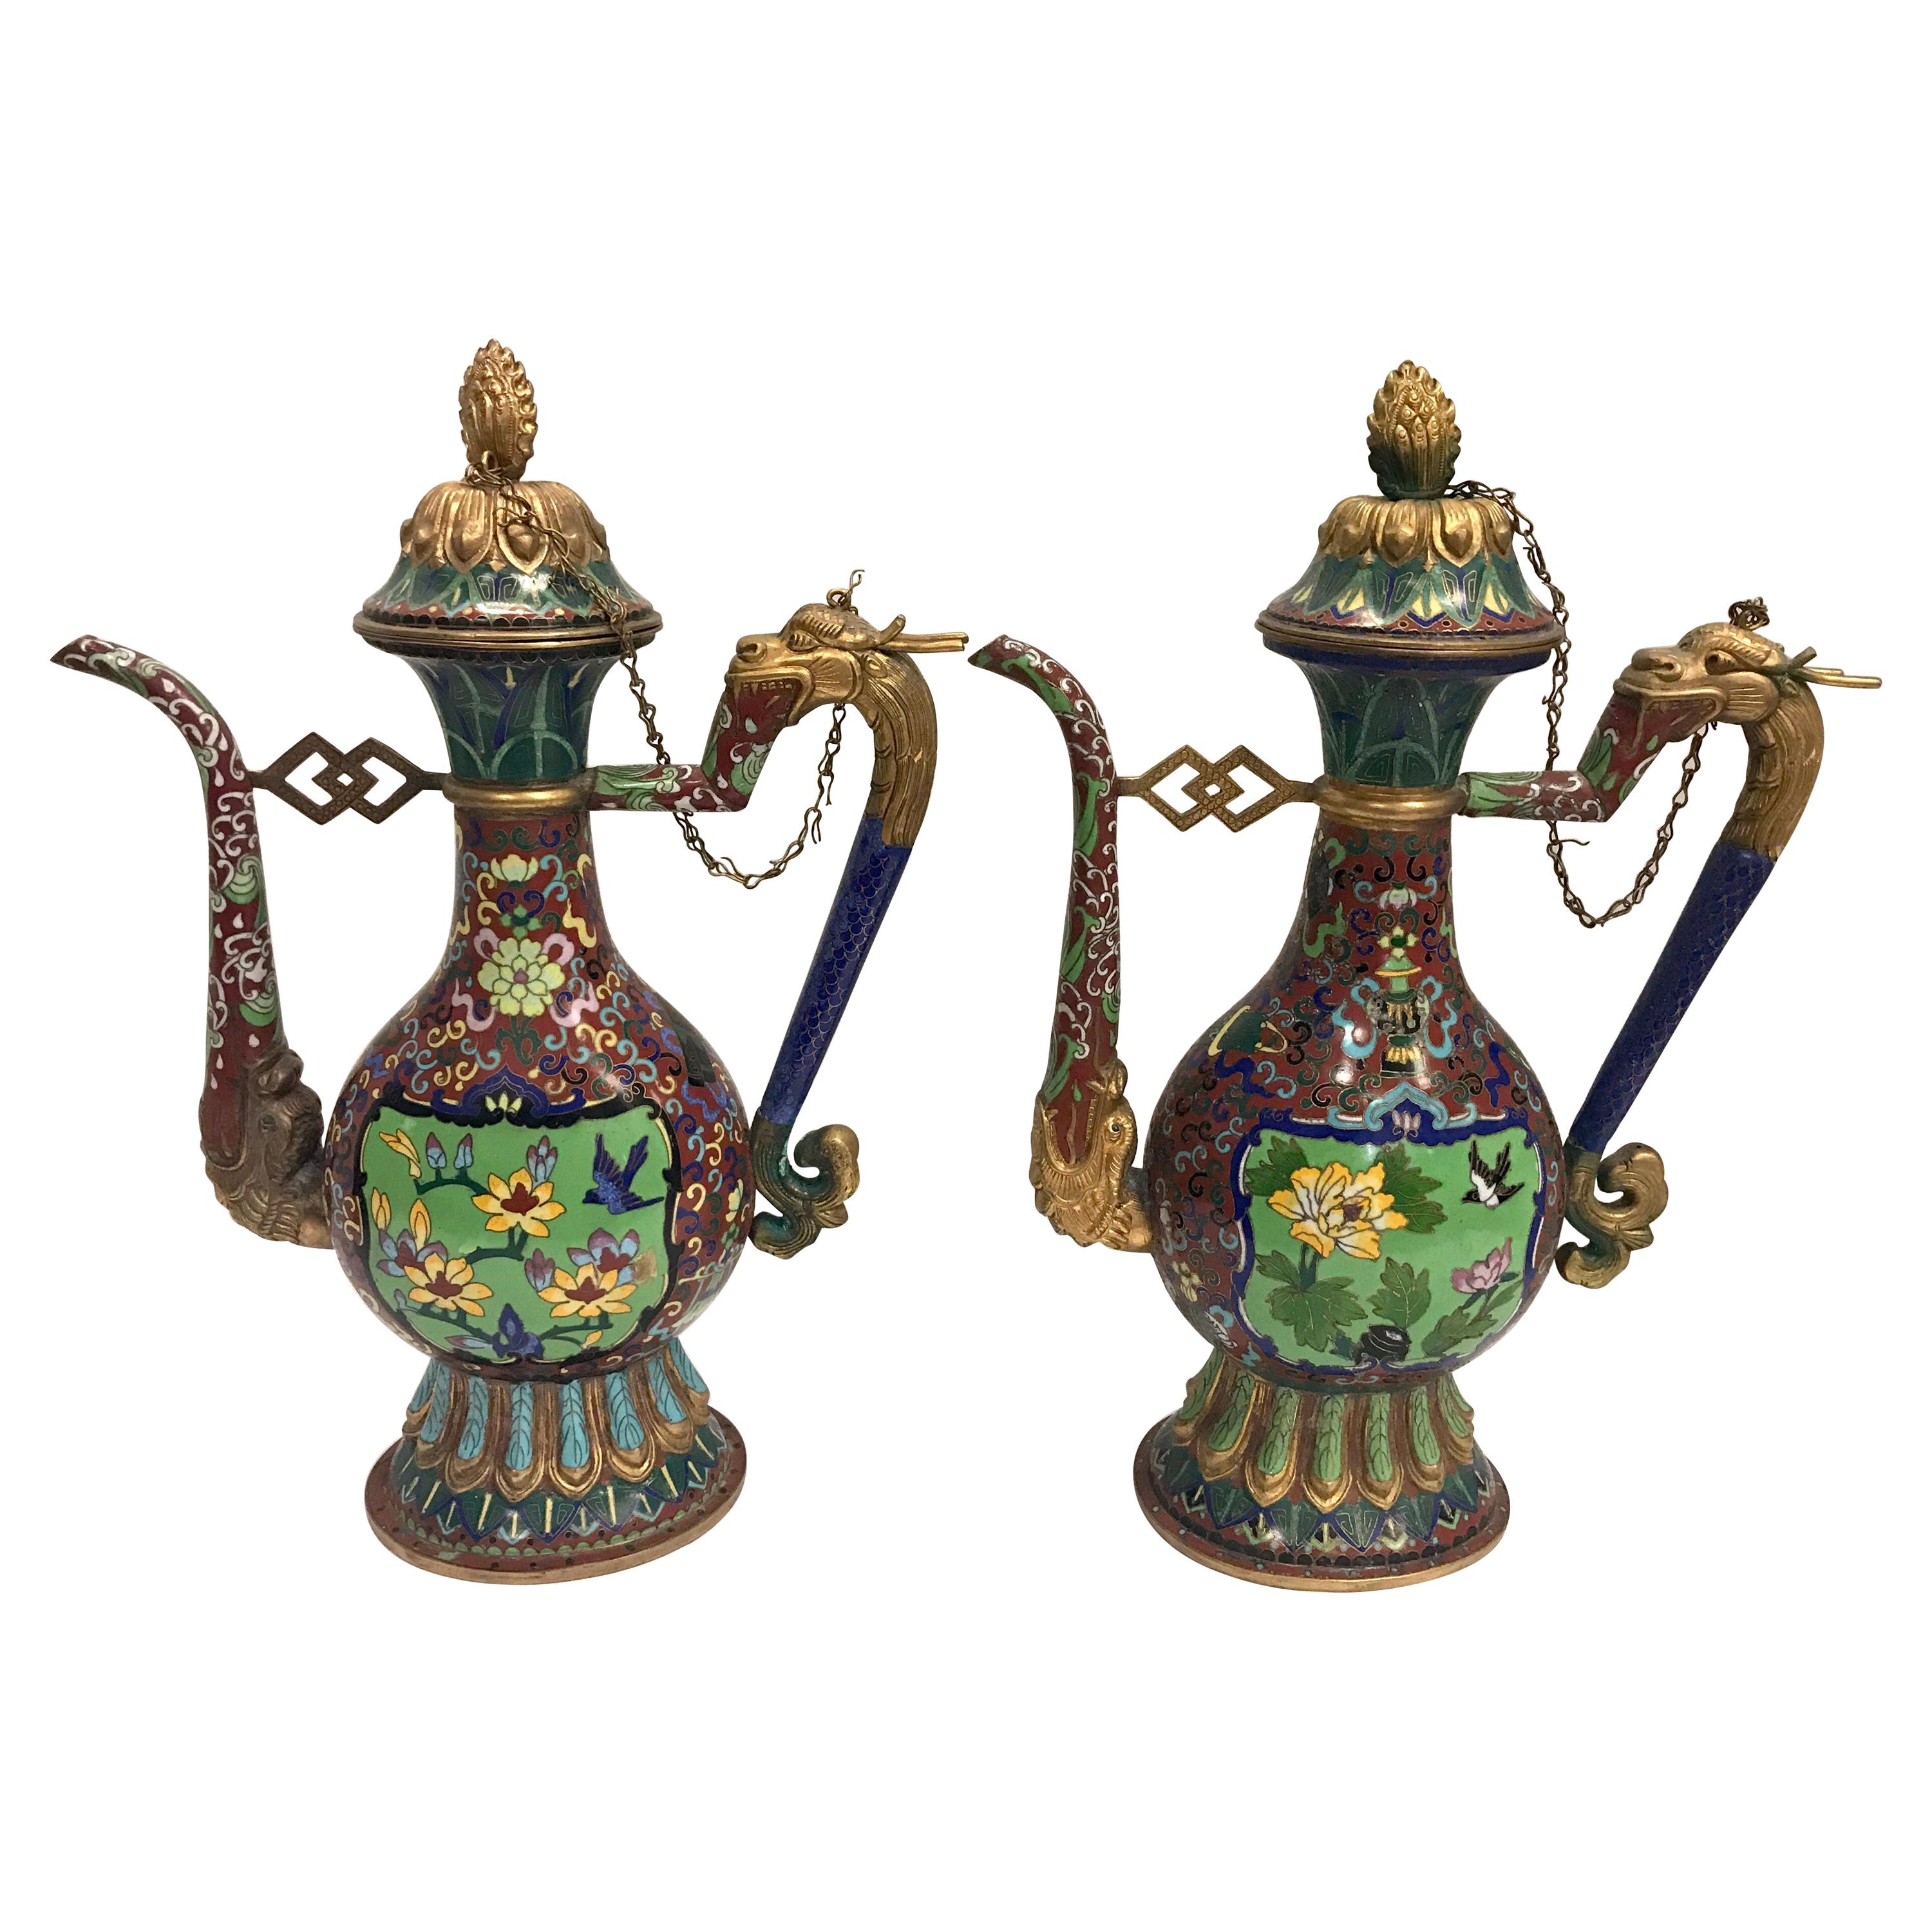 Pair of Chinese Cloisonné Ewers Pitchers Decanters